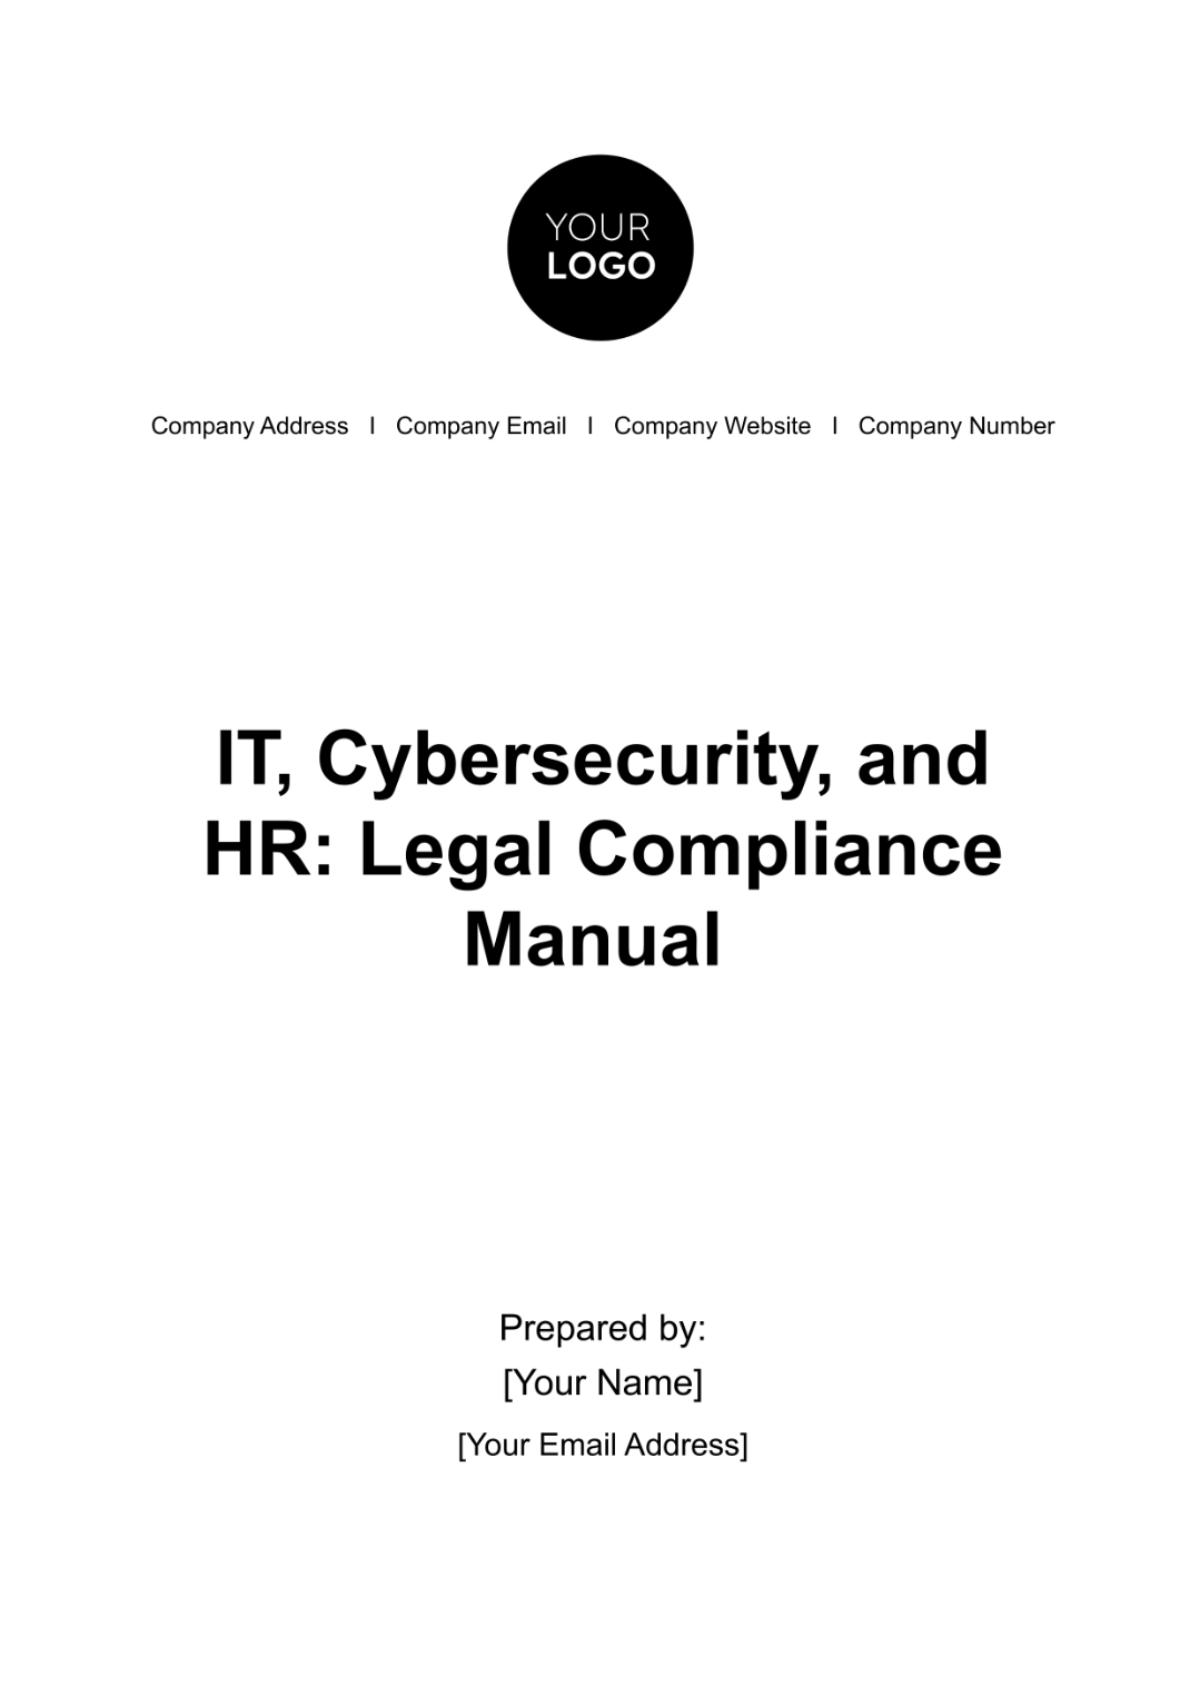 Free IT, Cybersecurity, and HR: Legal Compliance Manual Template